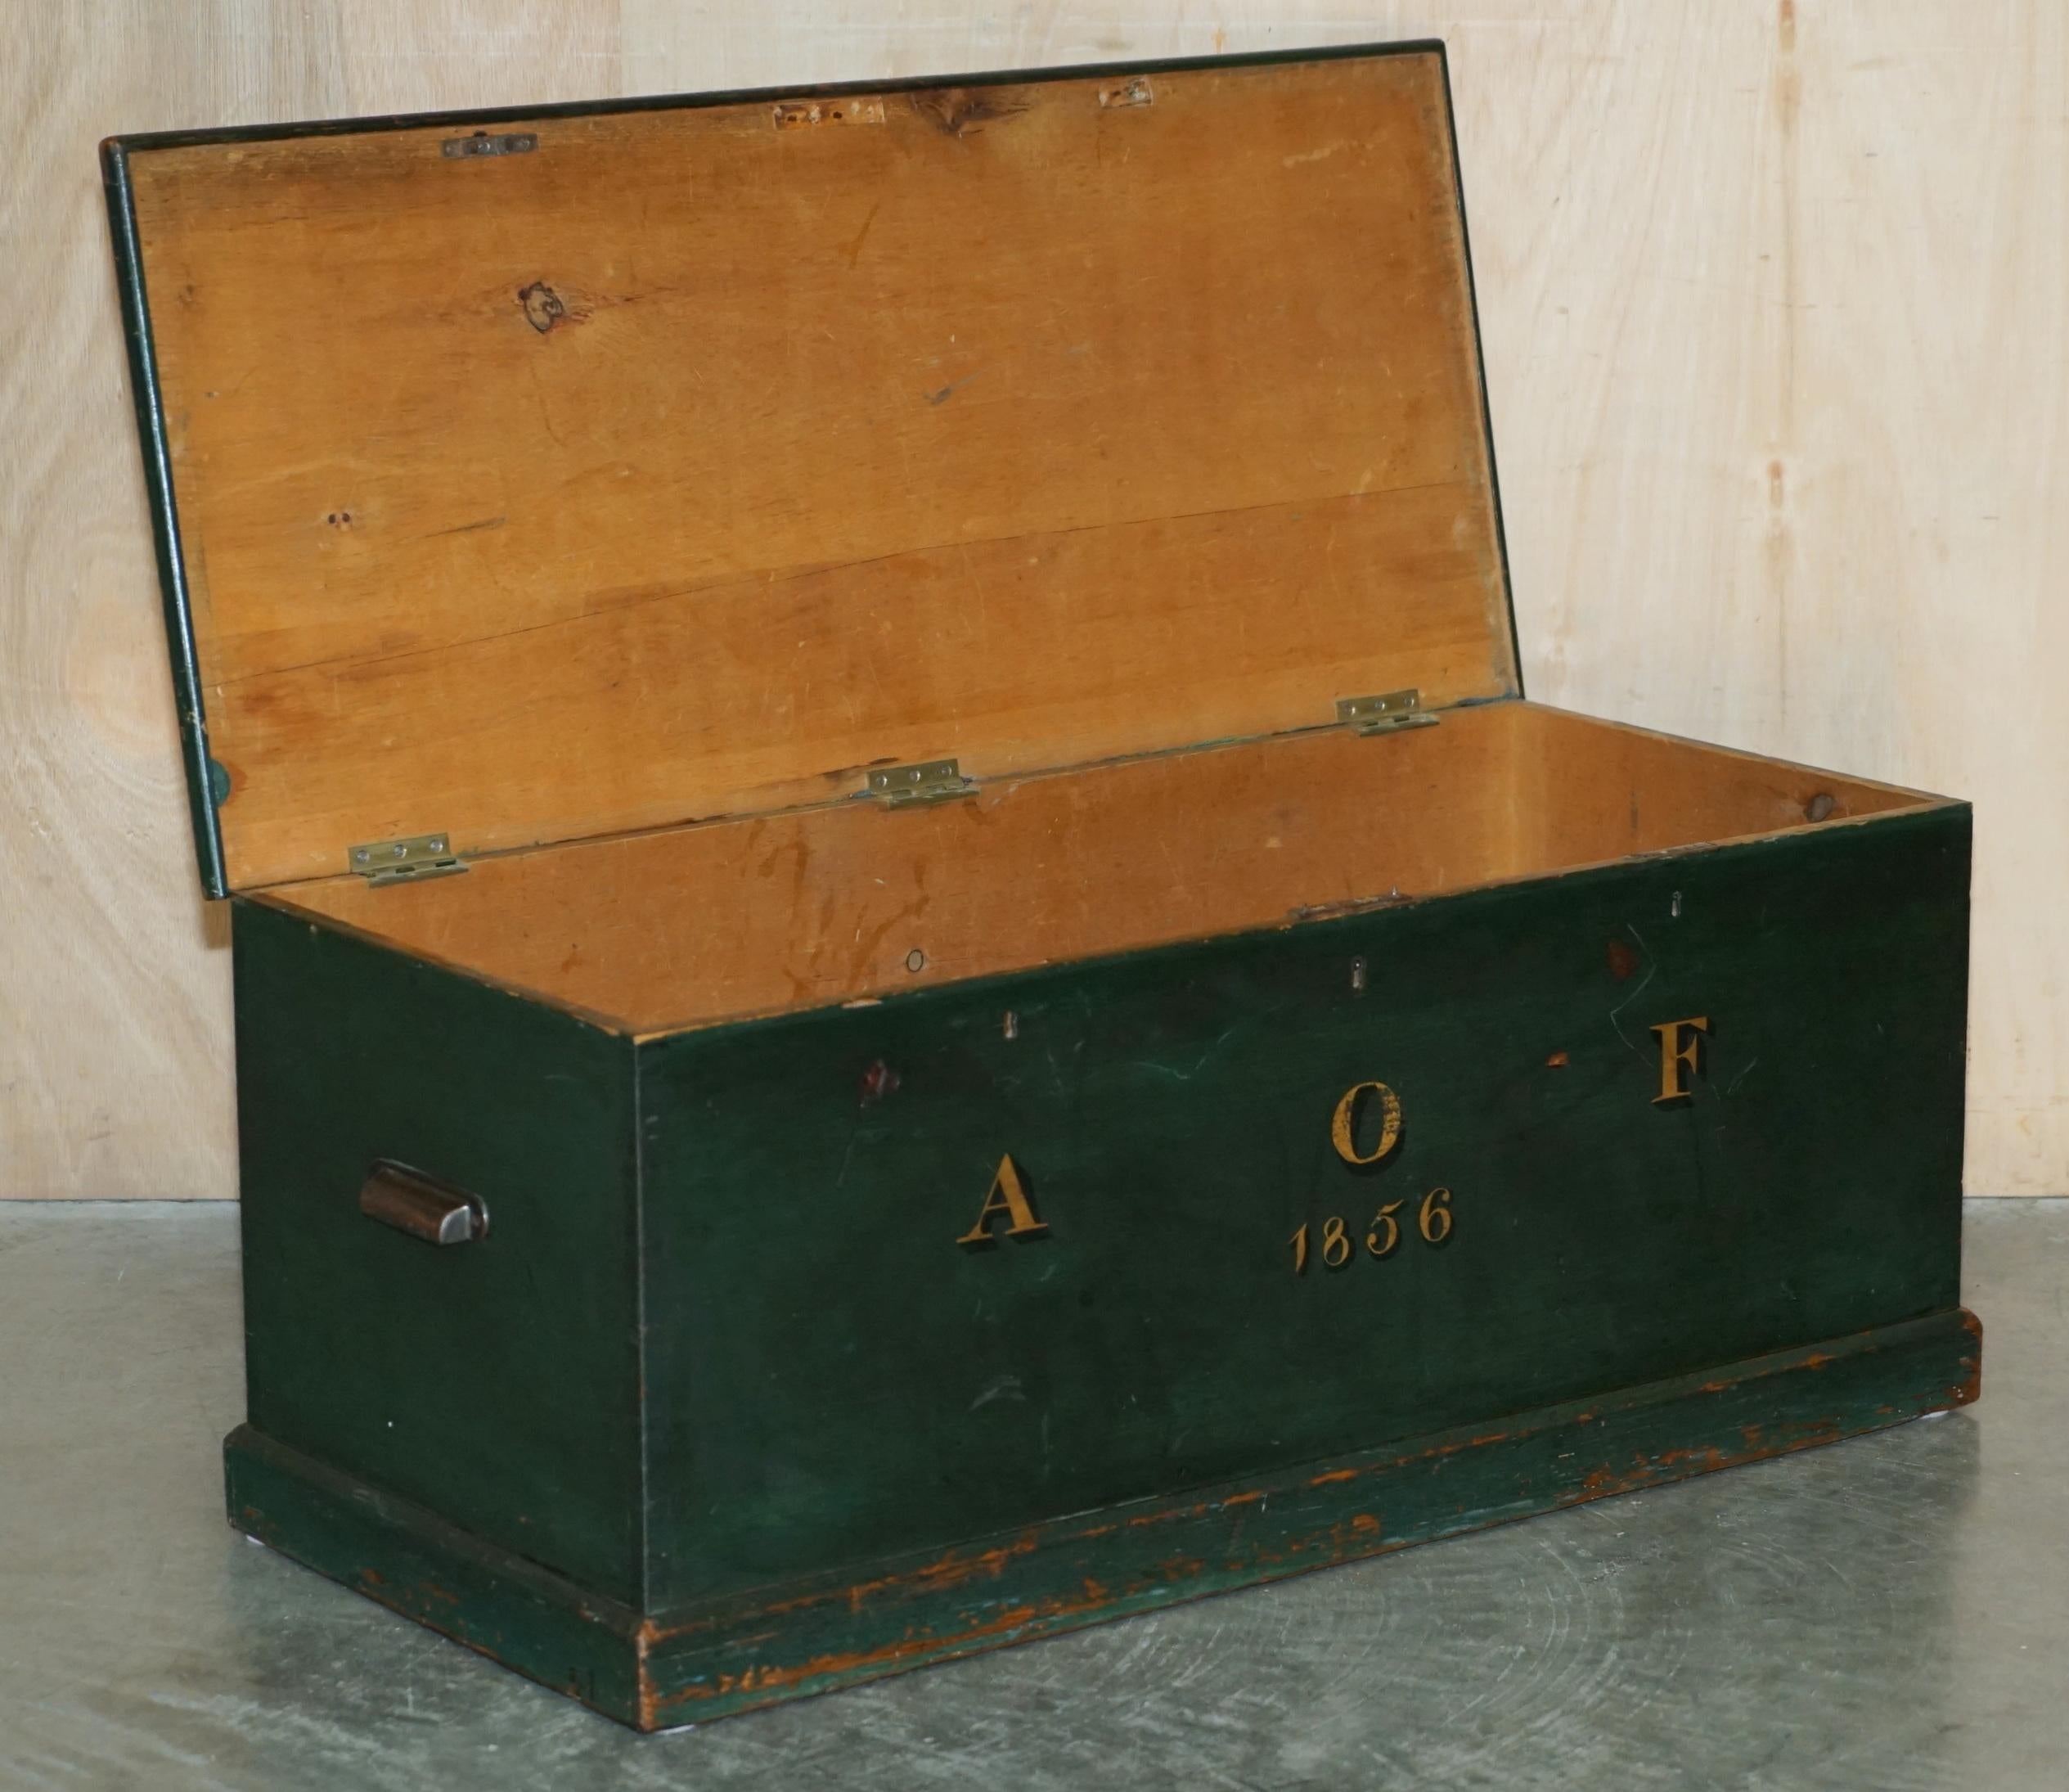 ANTIQUE 1856 DATED HAND PAiNTED GREEN TRUNK CHEST IN PINE FROM AUSTRIA 10